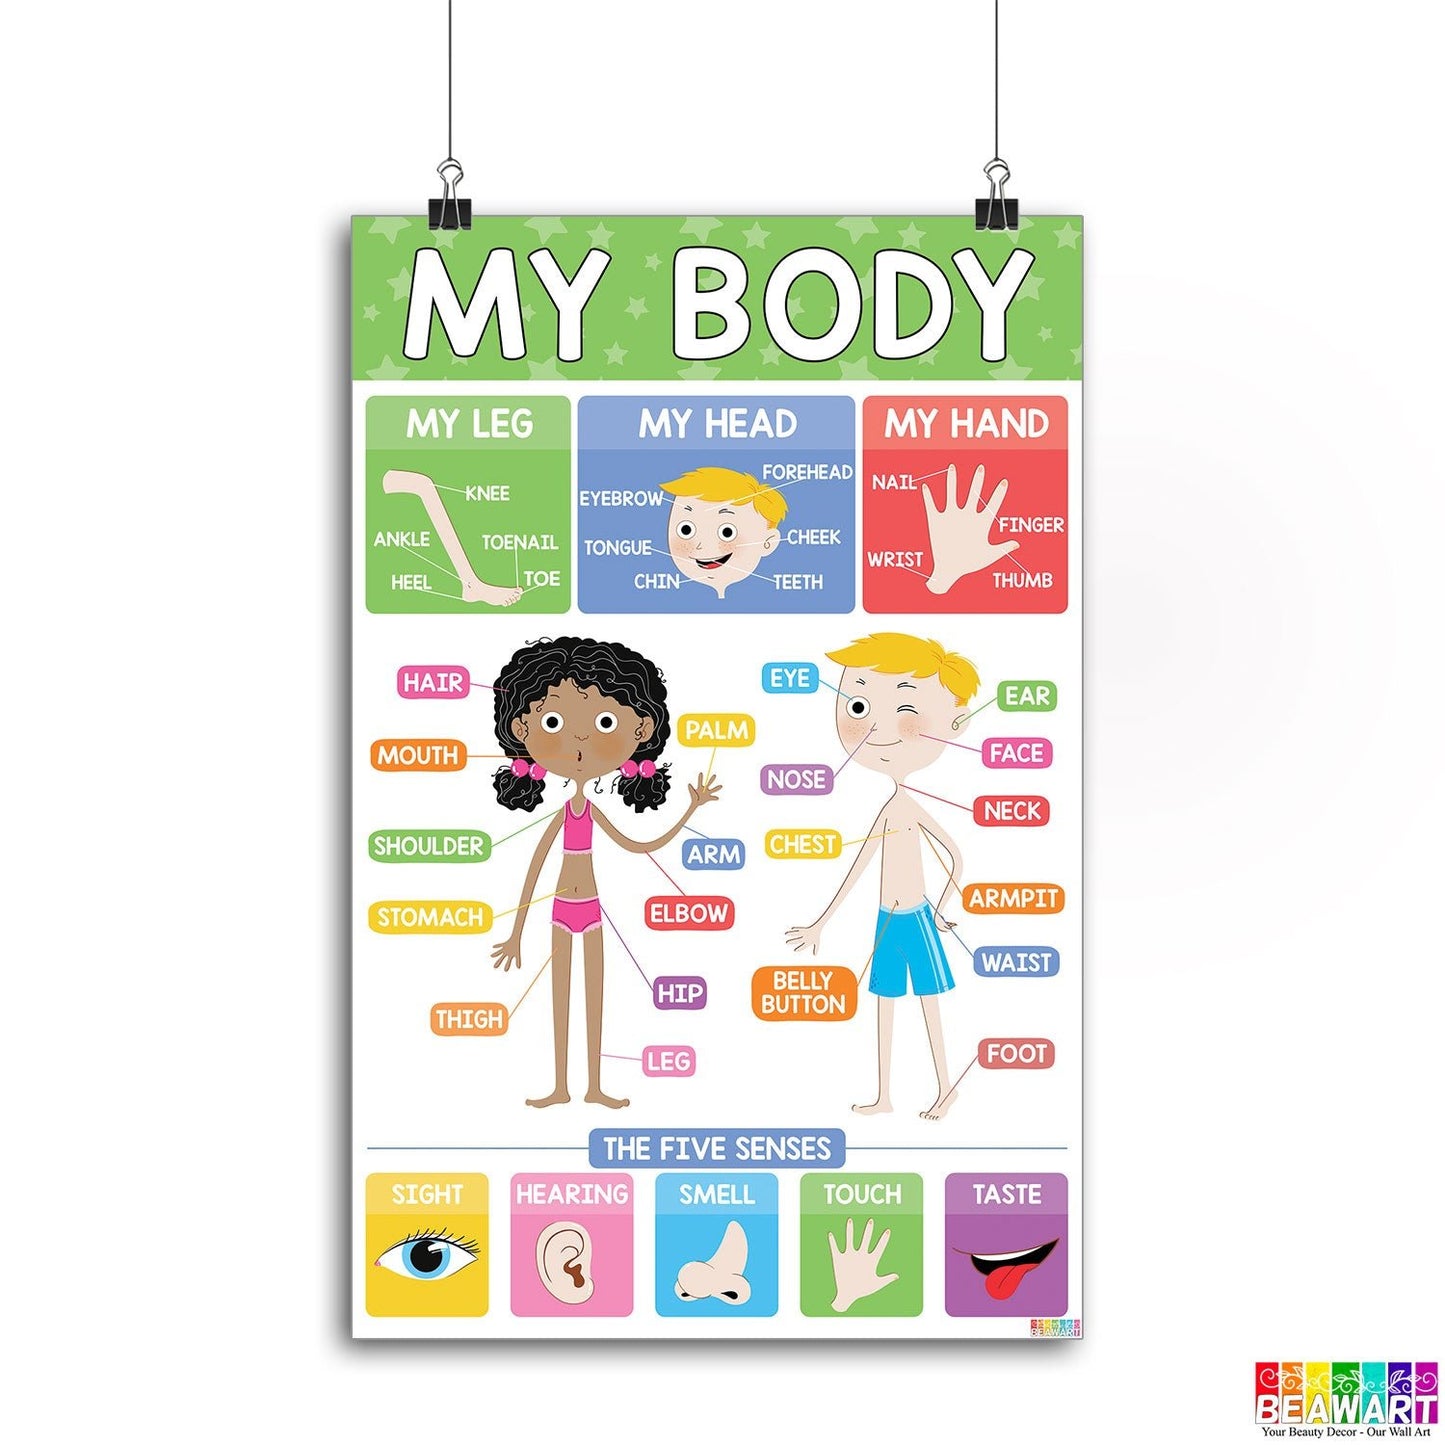 Vibrant Body Parts Chart Poster Laminated For Preschoolers/Kids, Educational Posters For Toddlers, Learning Posters For Toddlers 1-3, Preschool Homeschool Posters For Kindergarten Classroom Wall Decor - BEAWART